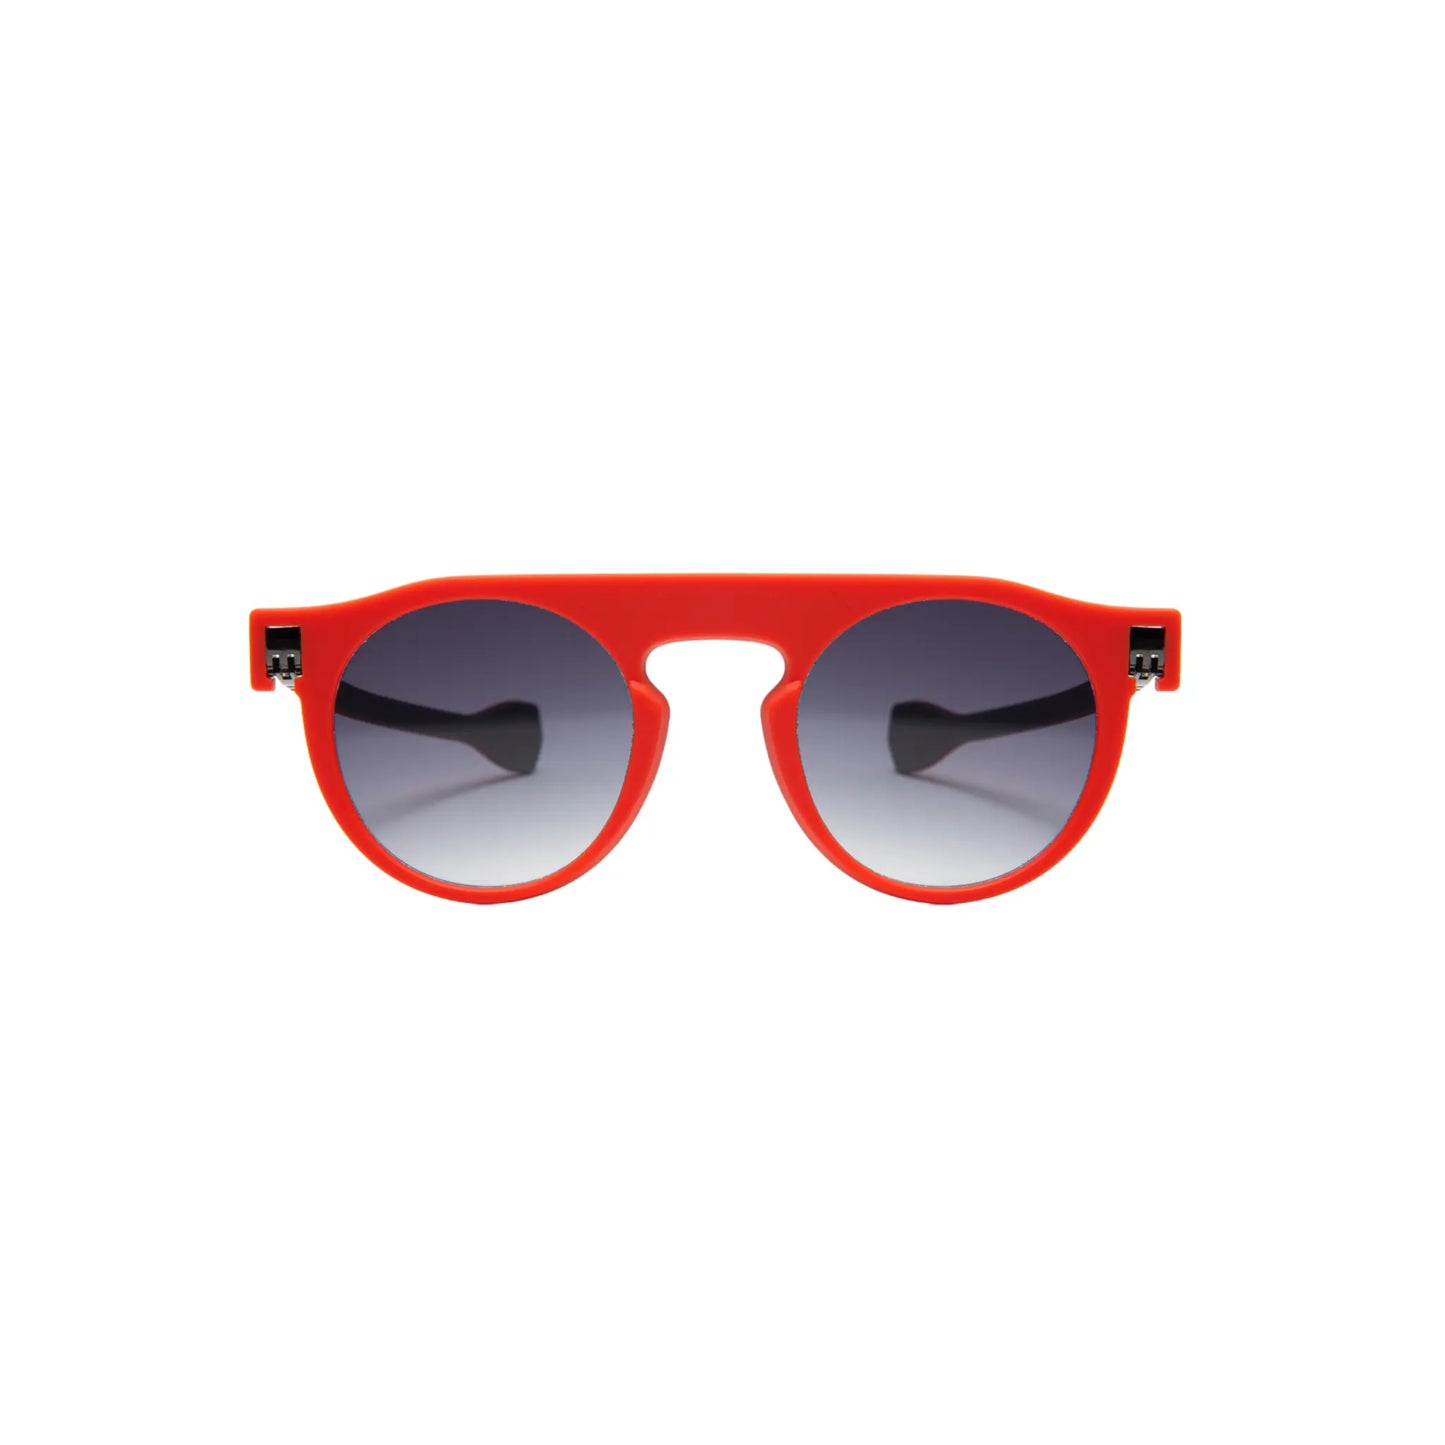 Reverso sunglasses grey & red reversible & ultra light front view 2